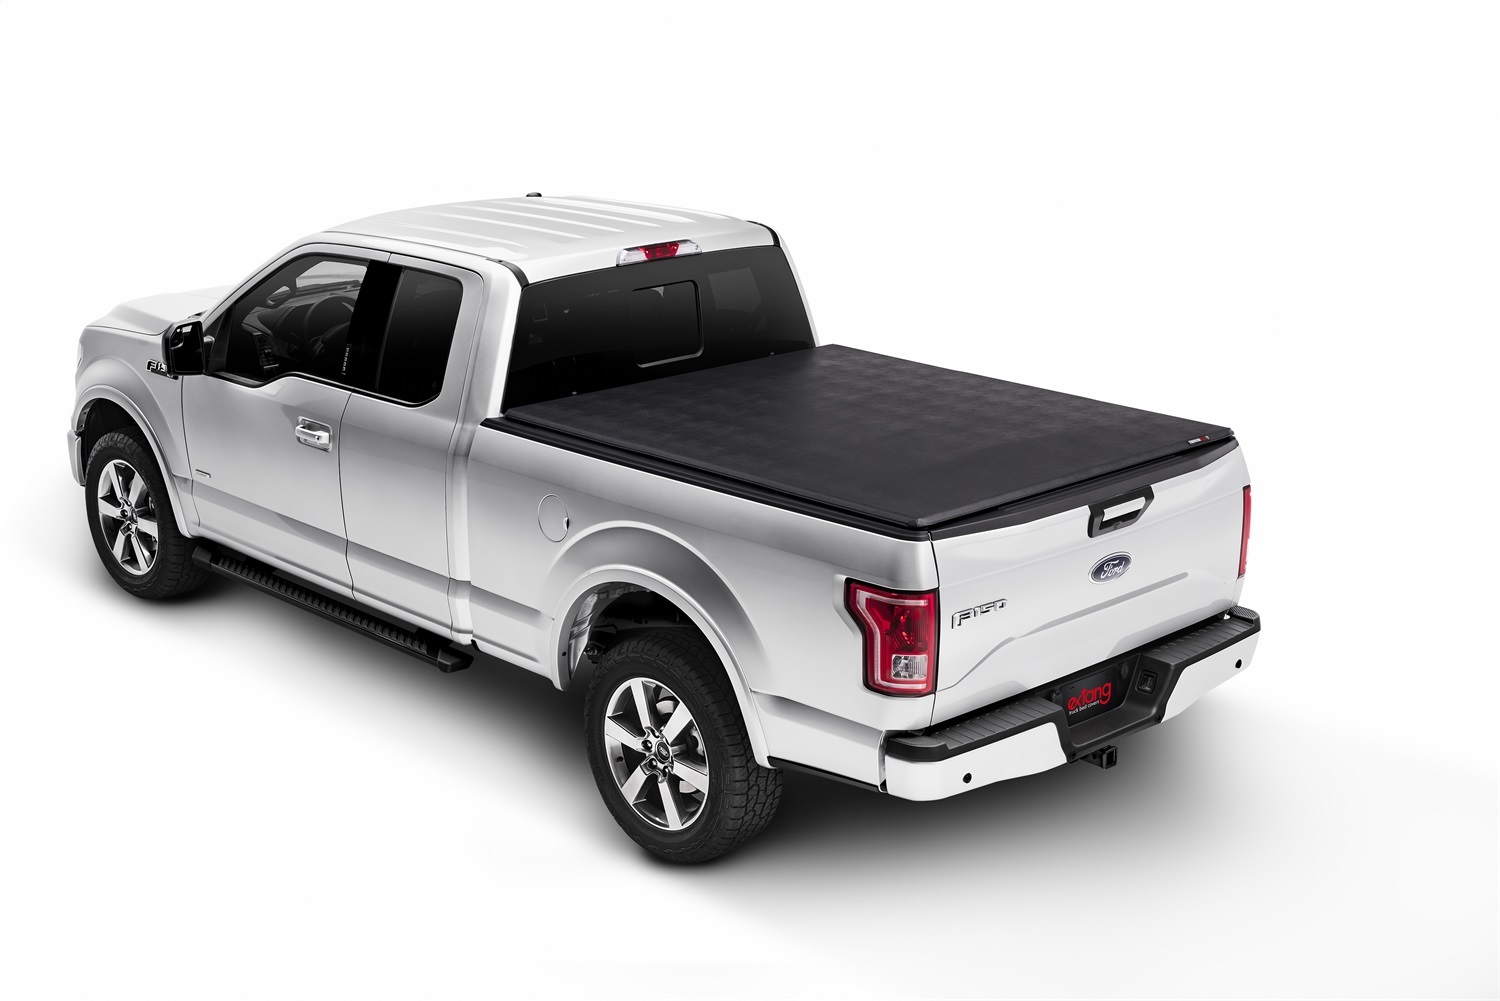 Extang 92710 Trifecta 2.0 Tonneau Cover Fits 97-04 F-150 F-150 Heritage